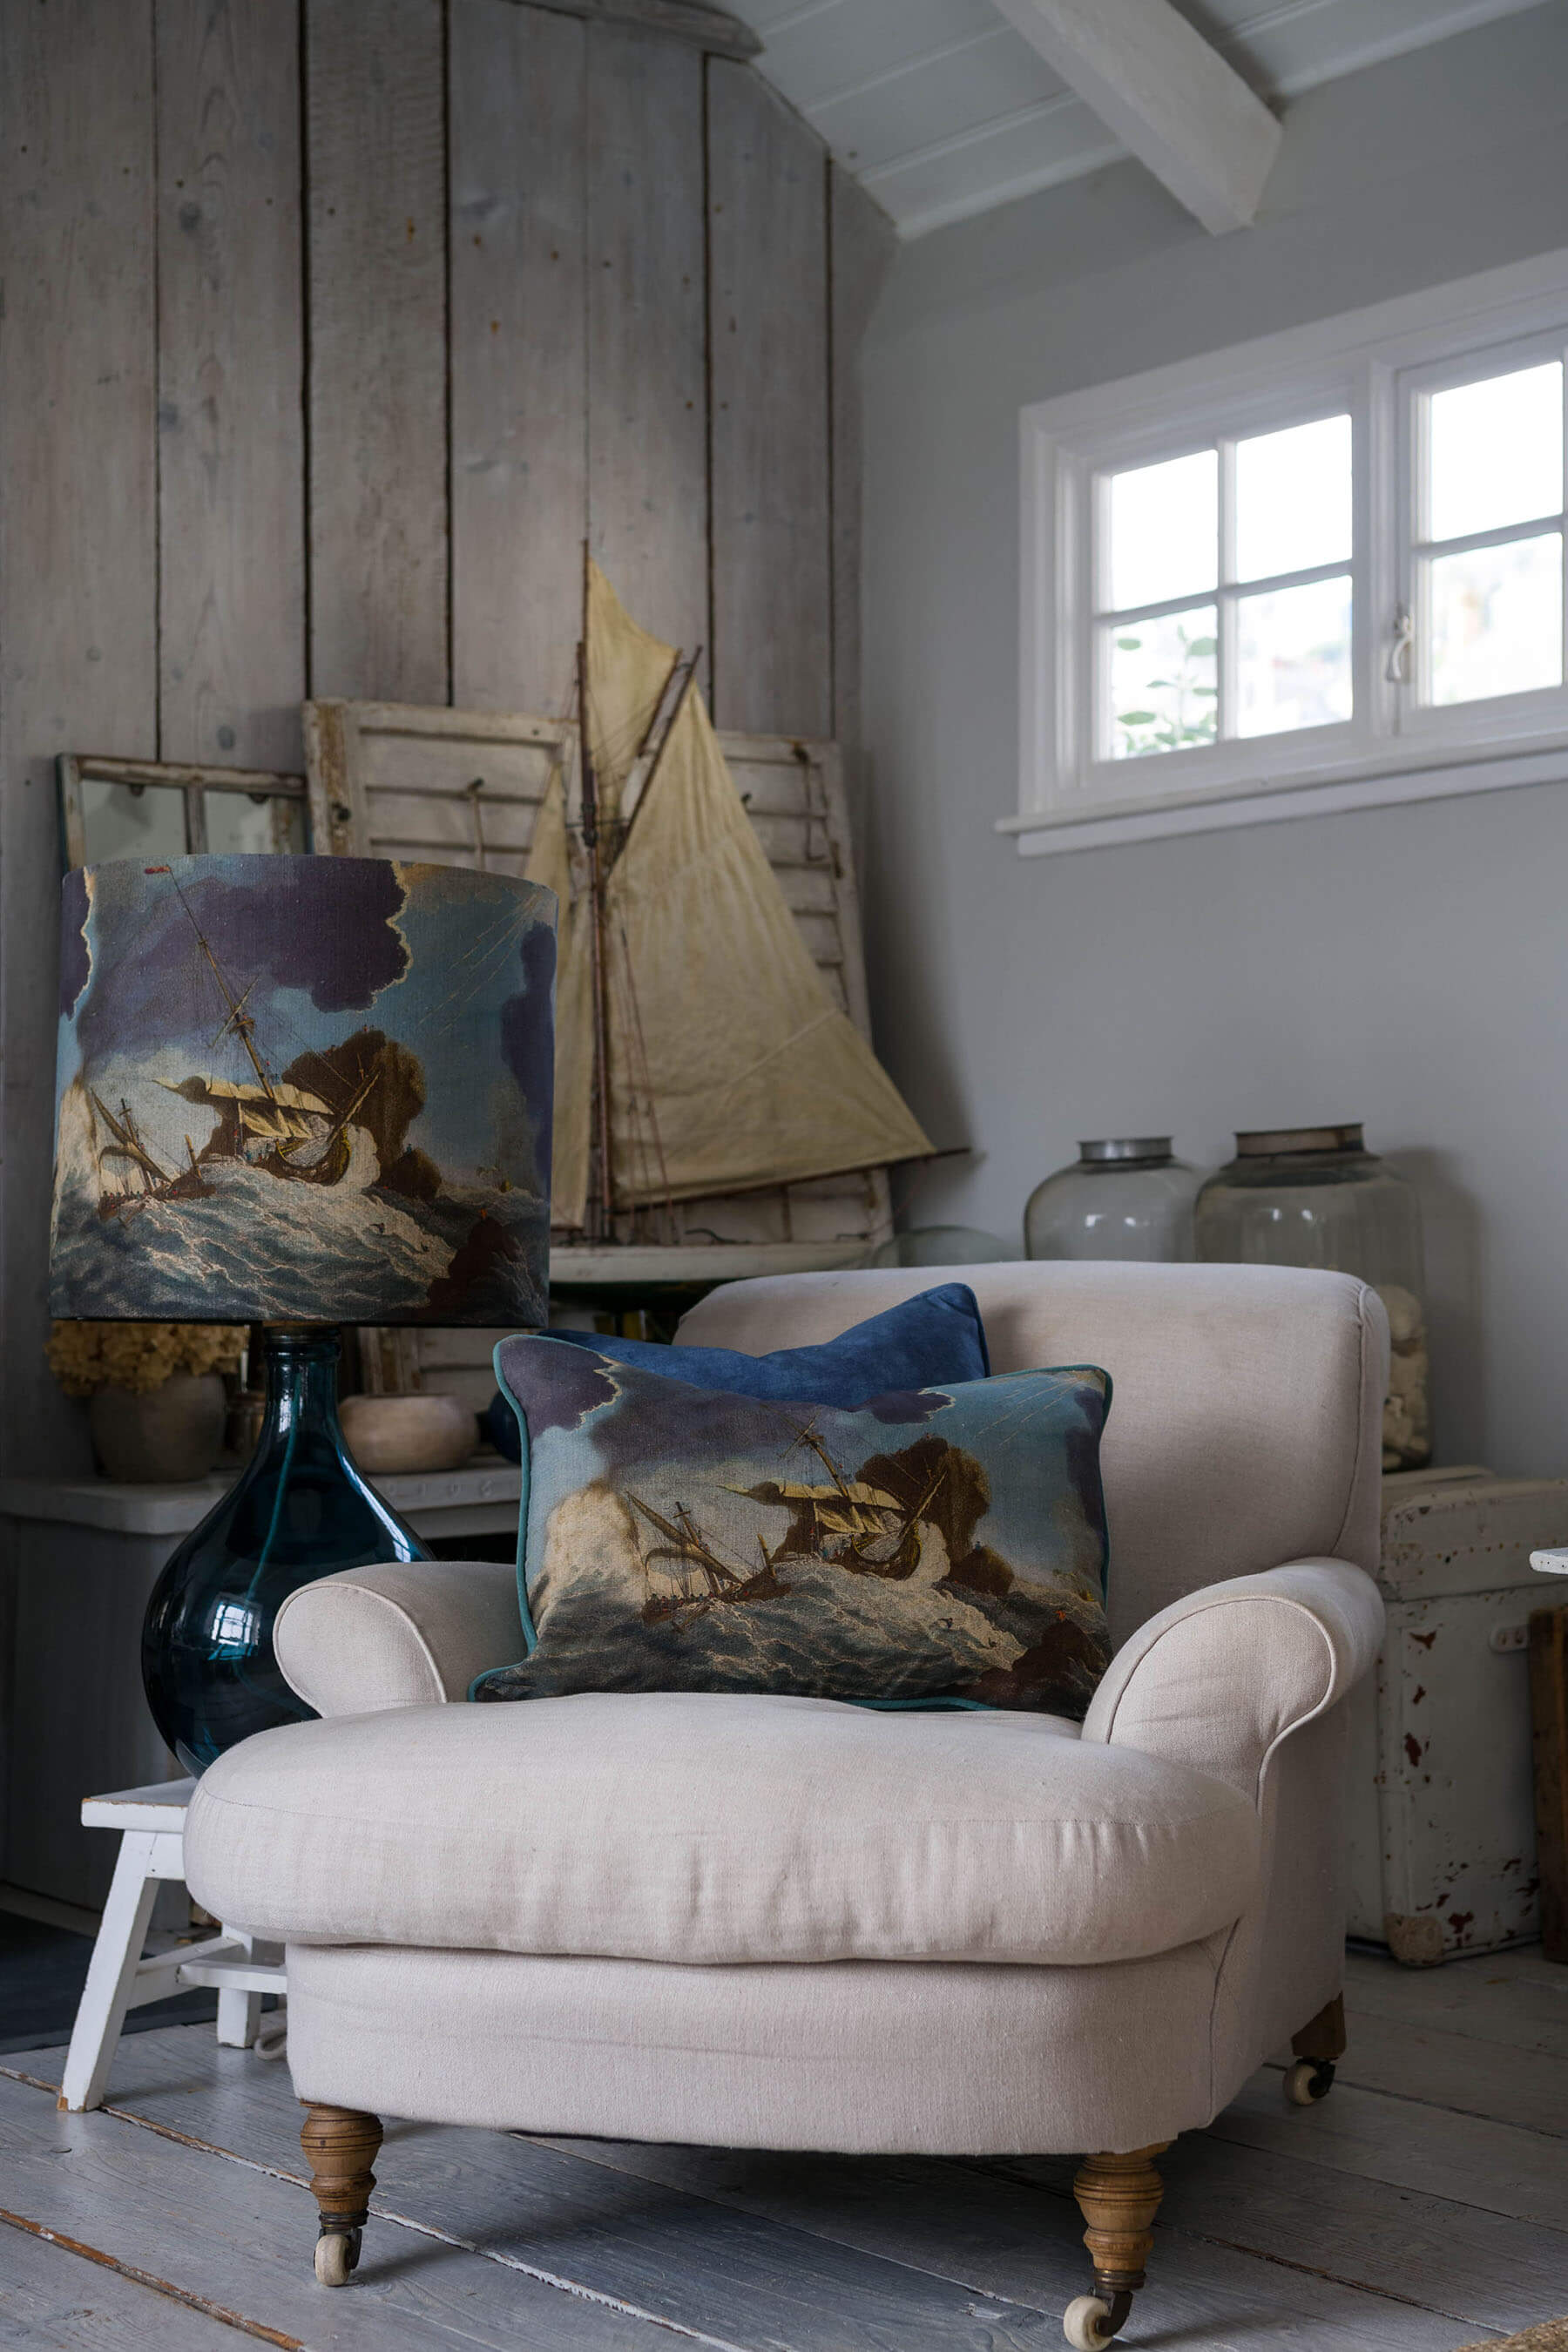 Shipwreck day cushion placed on a cream chair in front of a decorative sailing boat and other decorative items on a side table.Next to the chair is a matching lampshade on a petrol glass lampbase.